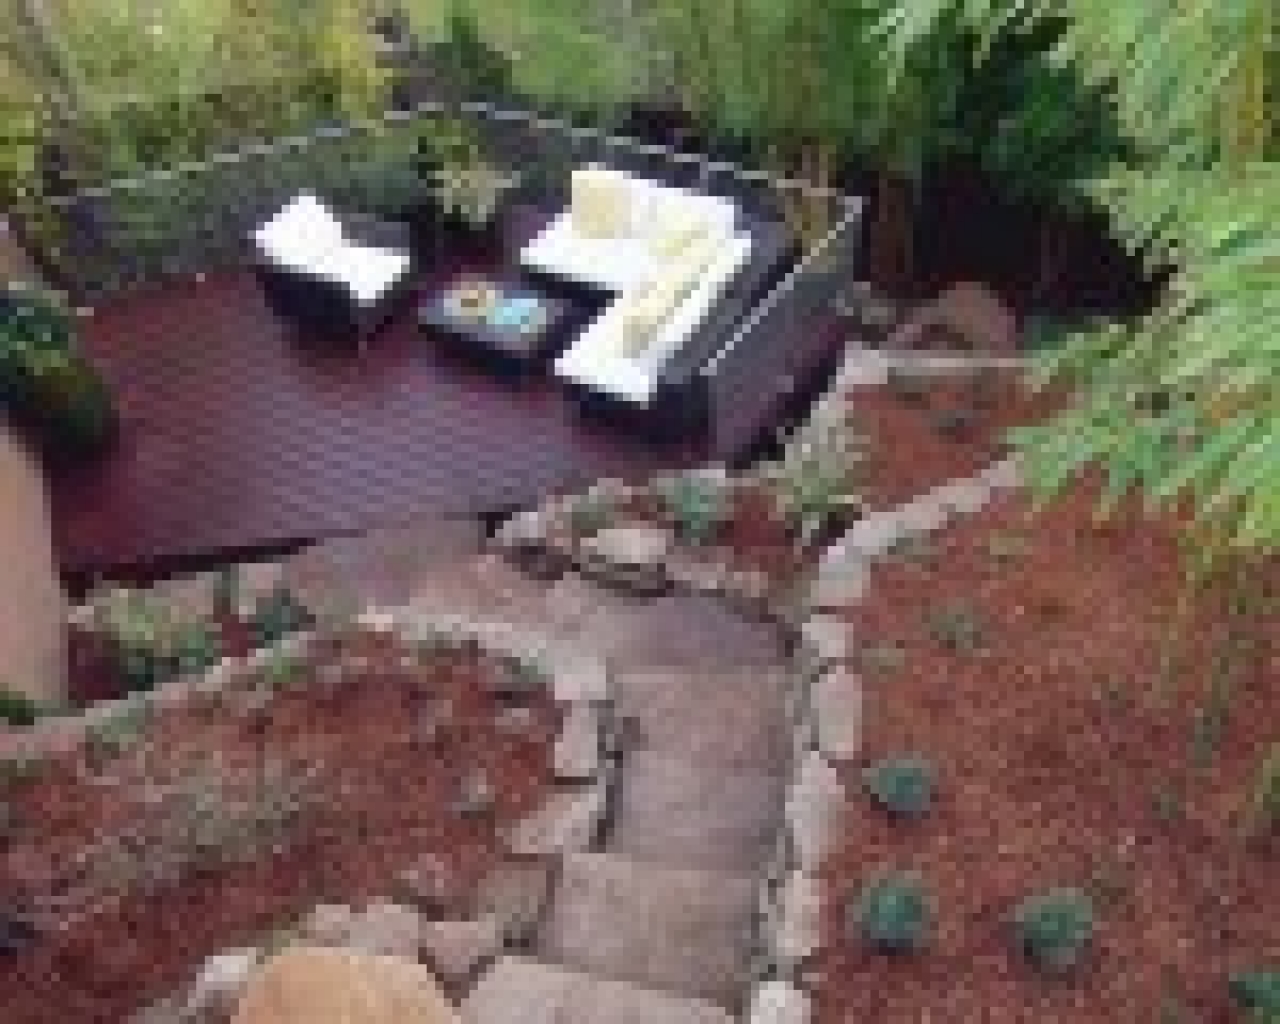  design for housestuscan patio ideas home design and decorating ideas